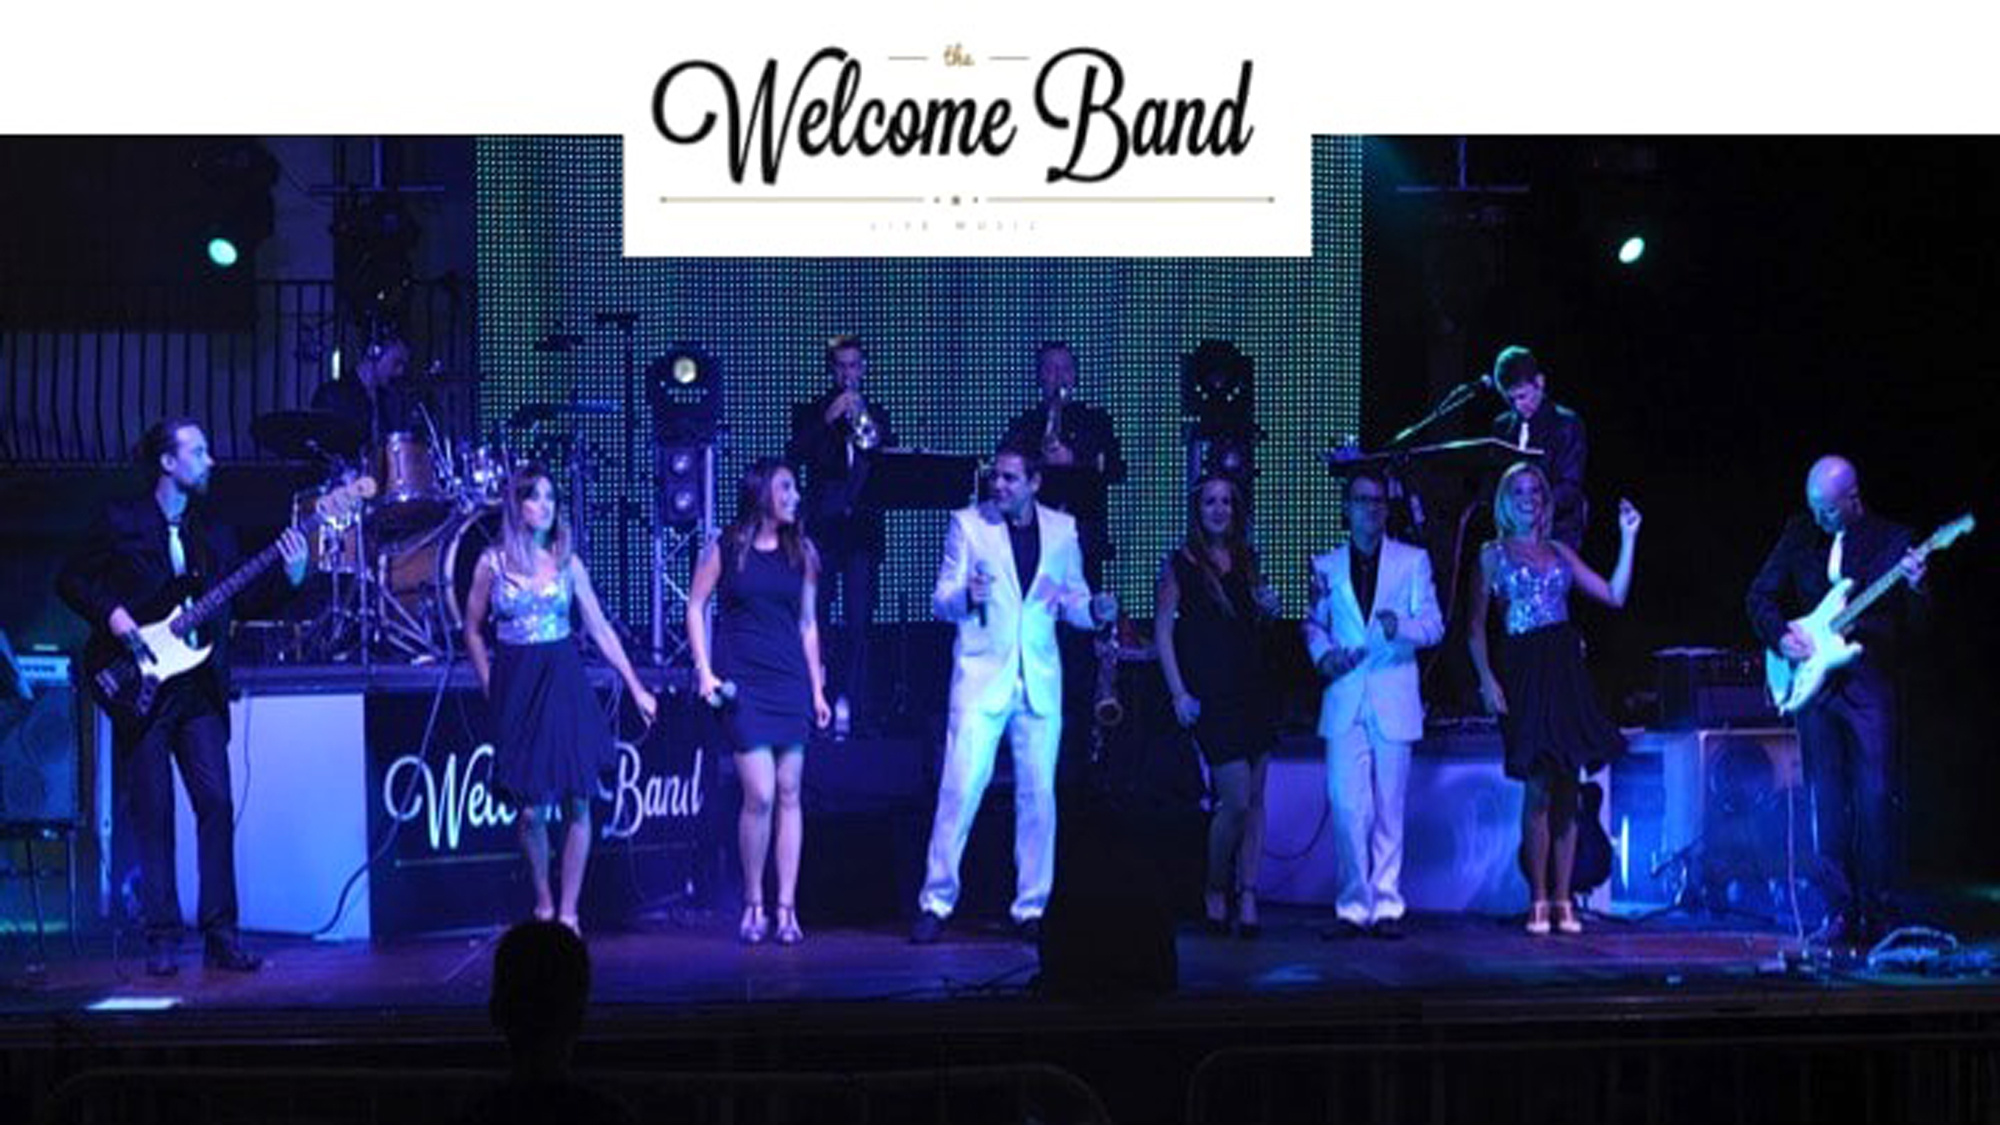 The Welcome Band